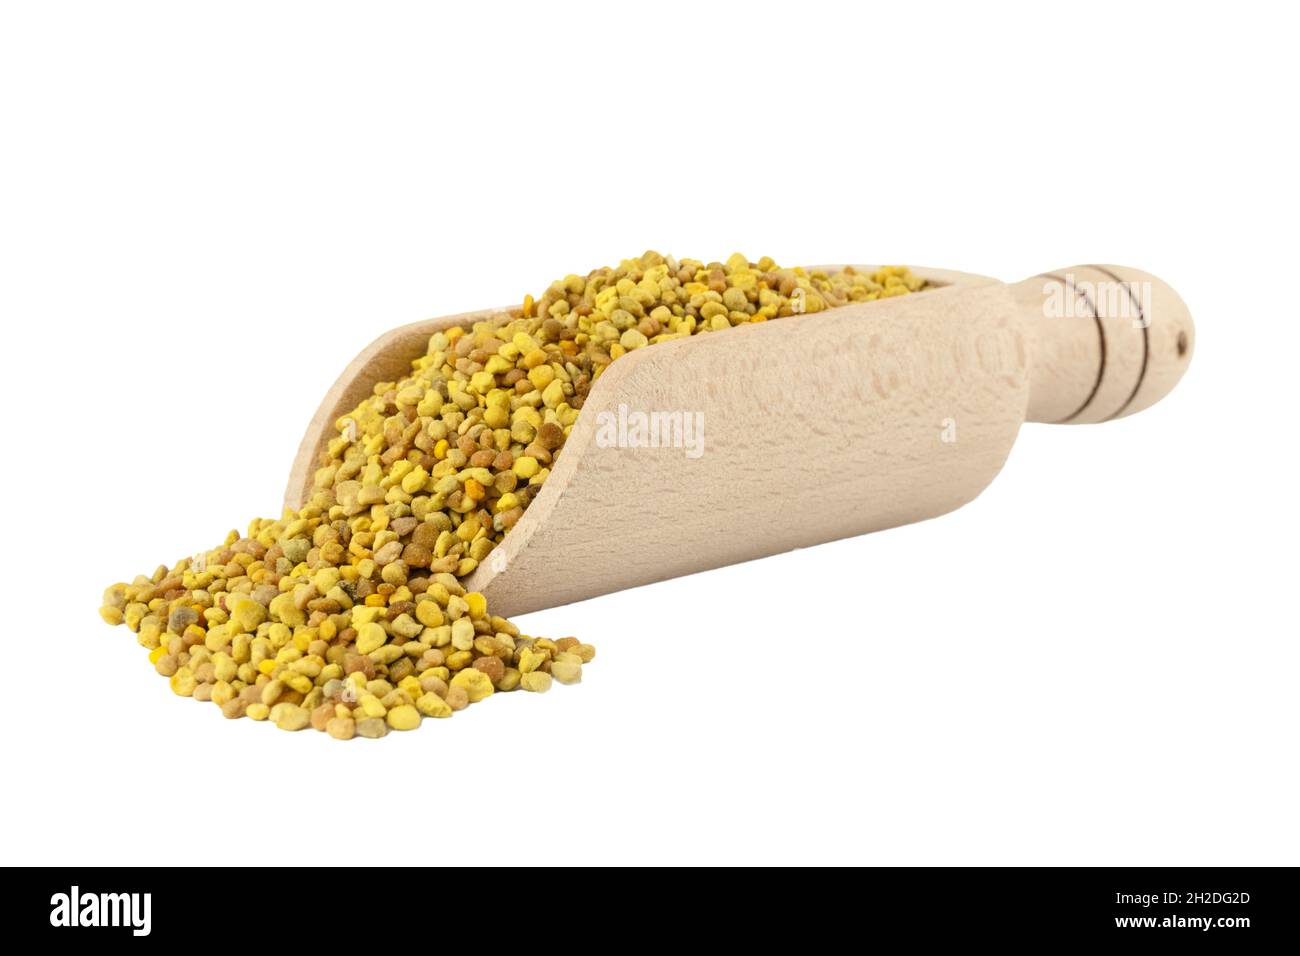 Bee pollen in wooden scoop isolated on white background. Natural herbal medicine to relieve inflammation, influenza, boosts liver health, strengthens Stock Photo